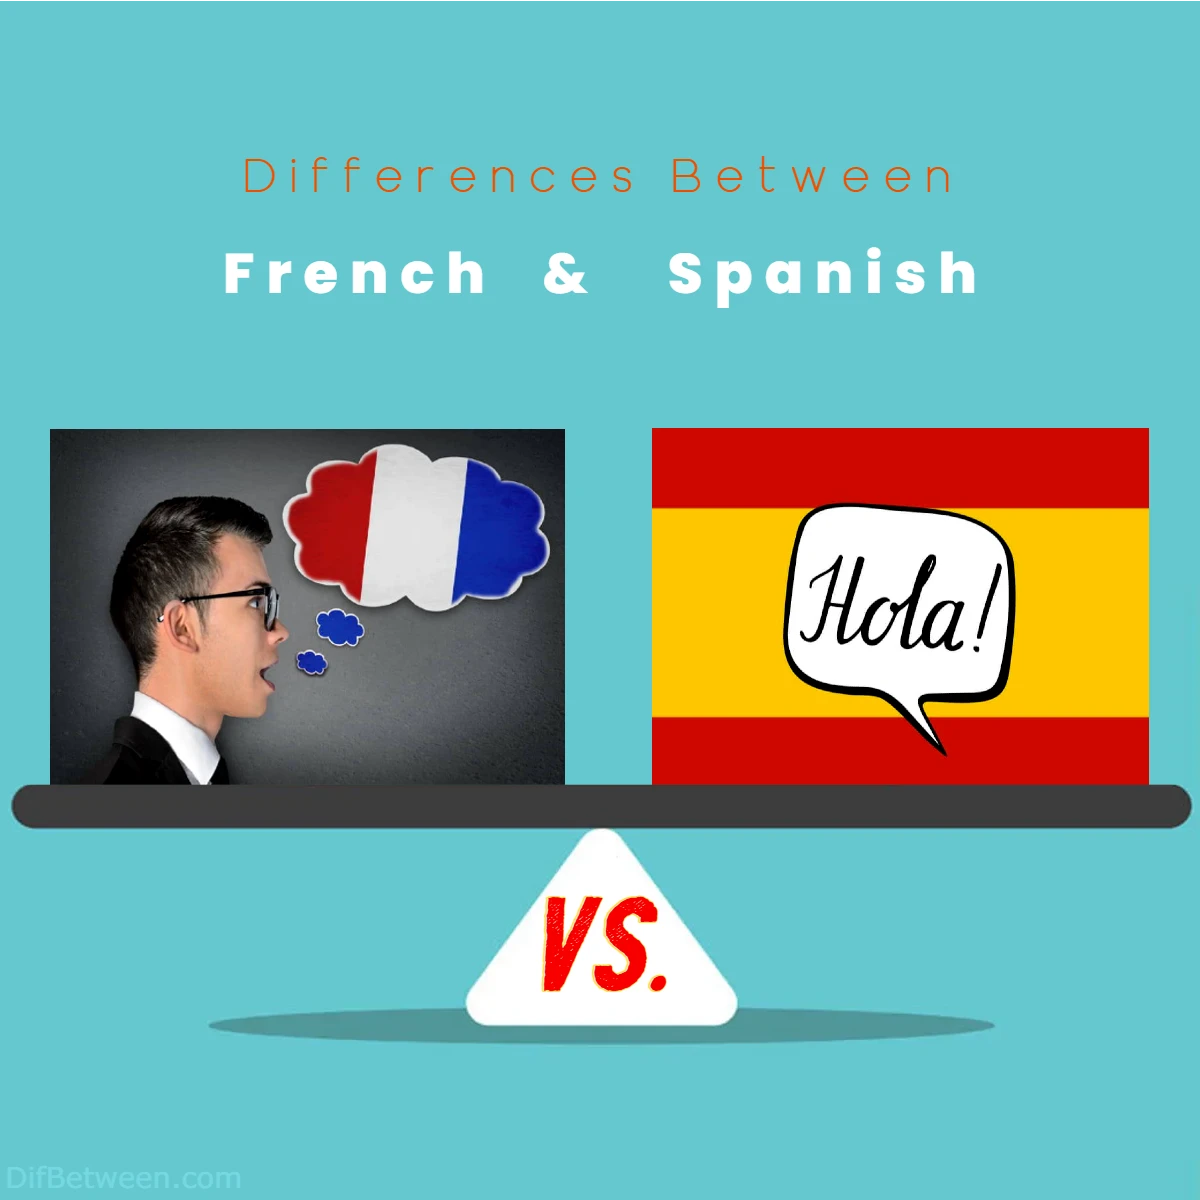 Differences Between French vs Spanish